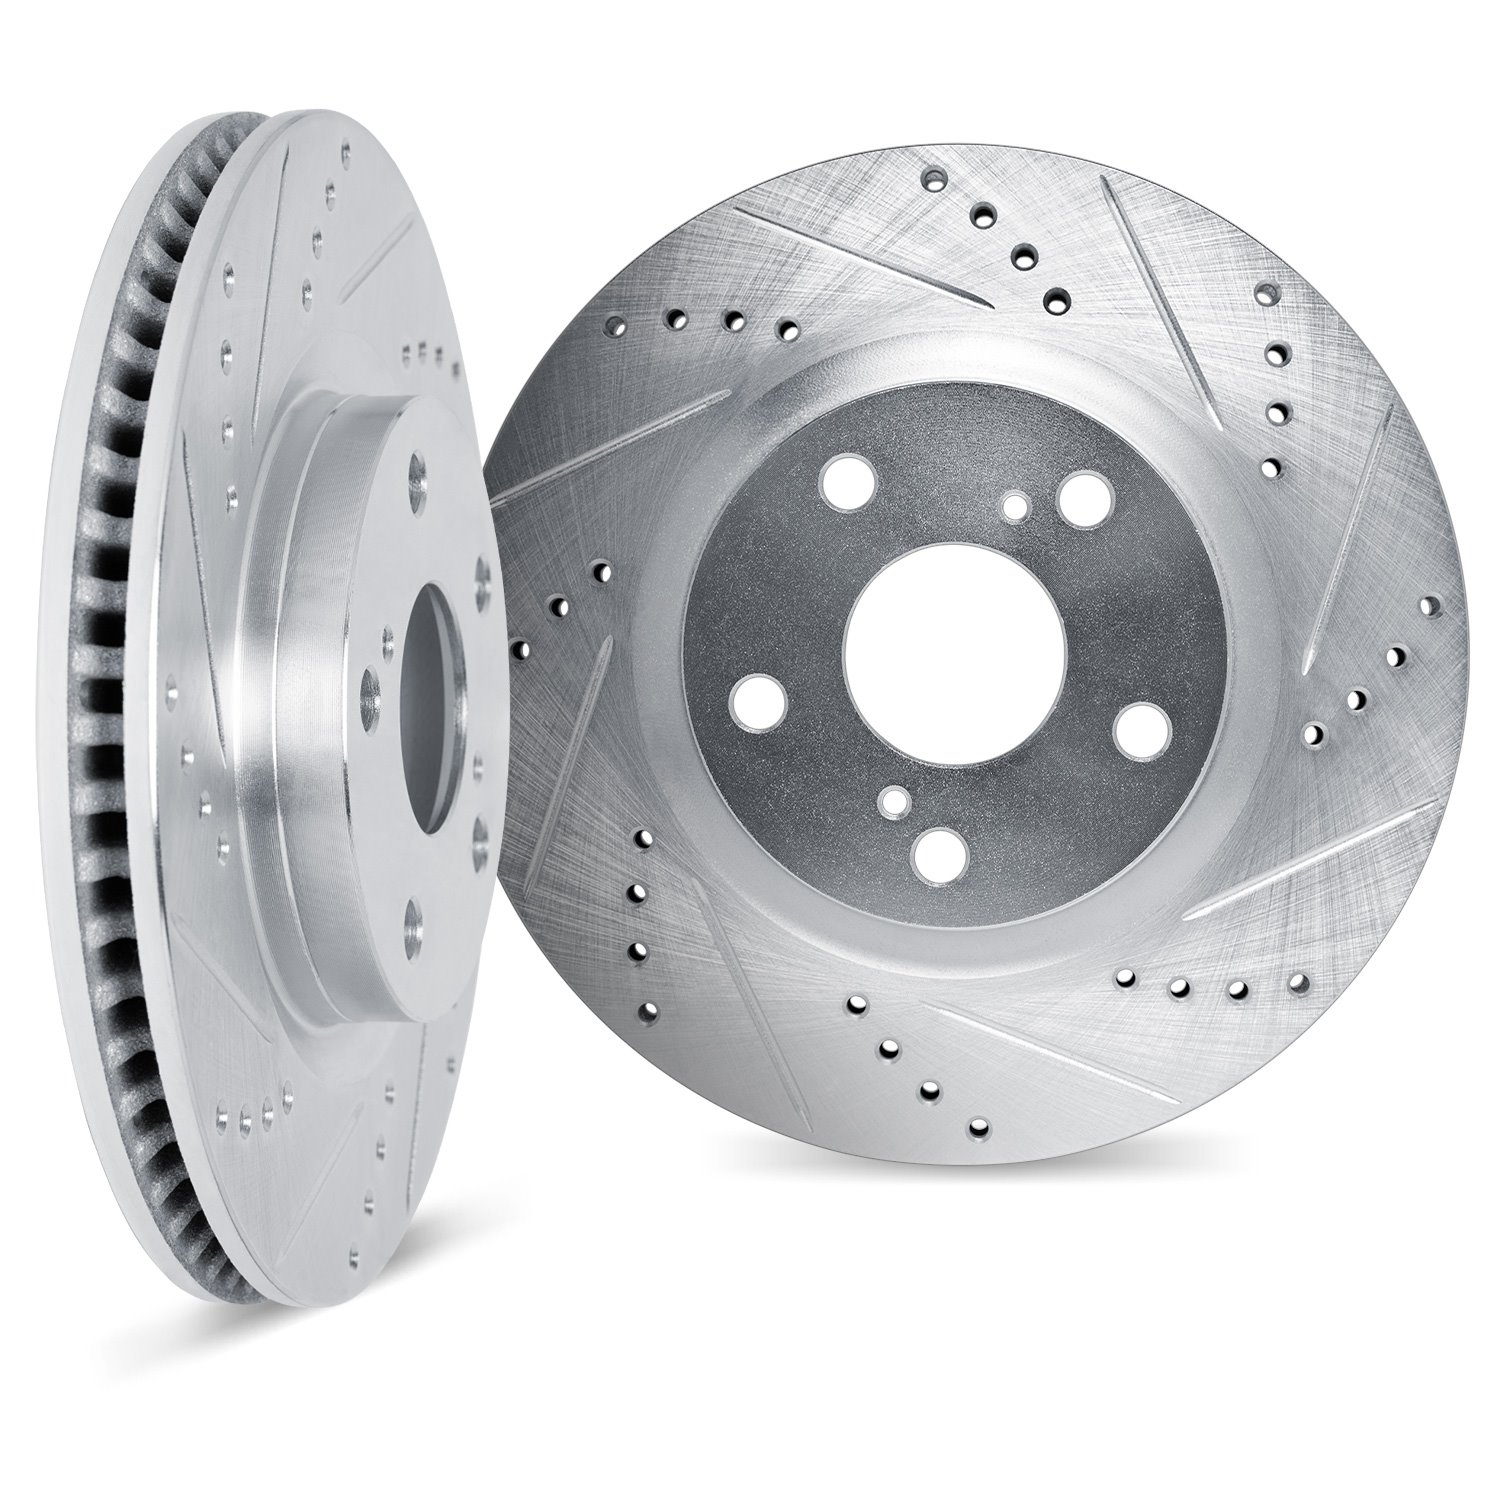 7002-75029 Drilled/Slotted Brake Rotors [Silver], Fits Select Lexus/Toyota/Scion, Position: Rear